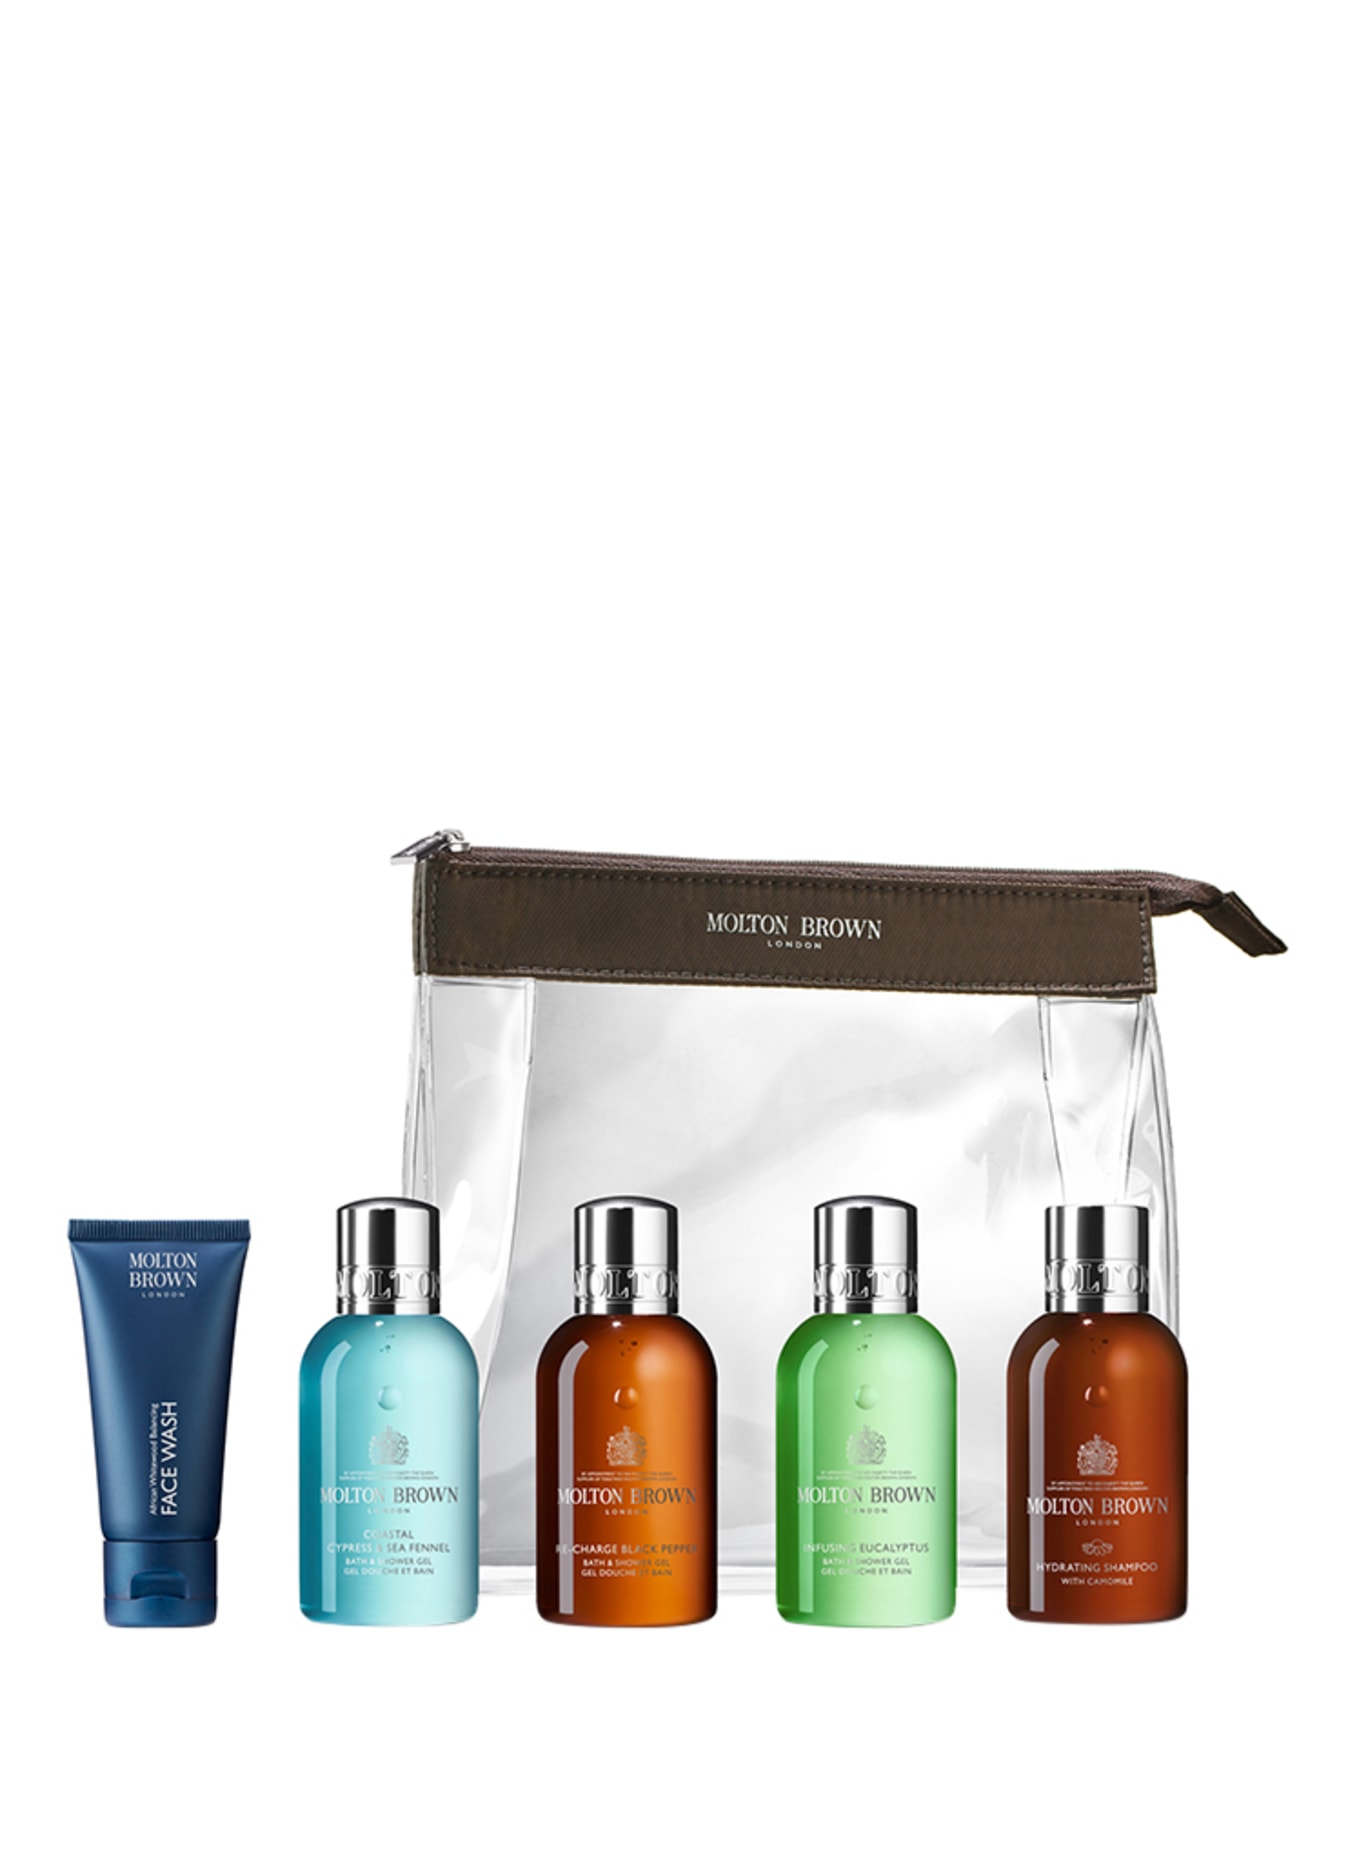 MOLTON BROWN THE REFRESHED ADVENTURER BODY & HAIR CARRY-ON BAG (Obrázek 1)